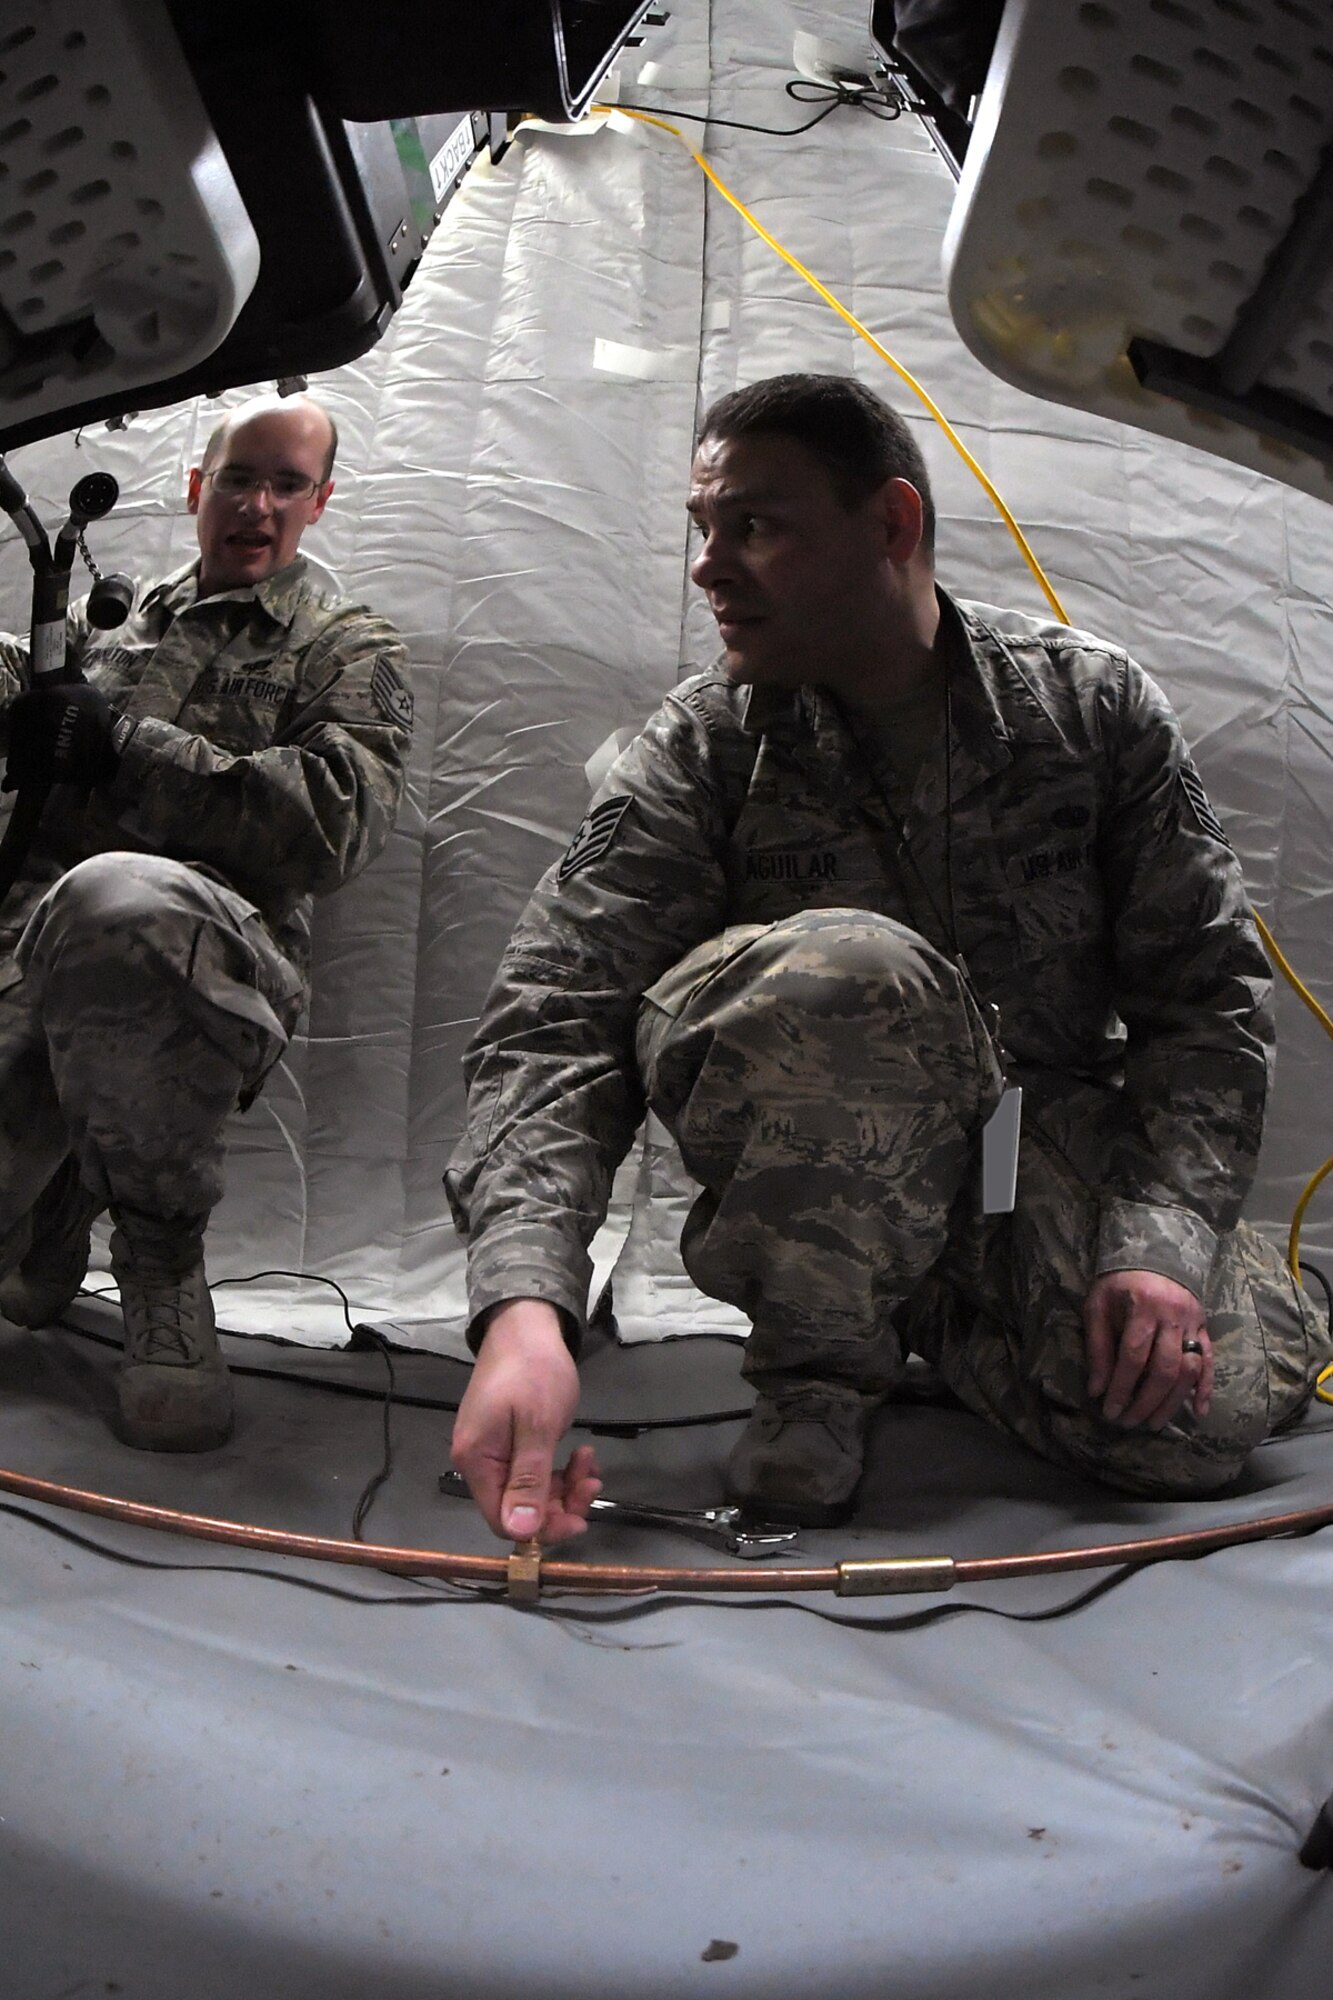 Technical Sgt. Kevin Aguilar (center) and Staff Sgt. Joshua Hamilton, both 729th Air Control Squadron, hook up an equipment grounding wire Feb. 5, 2019, during a readiness exercise at Hill Air Force Base, Utah. The evolution was part of an exercise to mobilize and set up a deployed radar location and control reporting center. (U.S. Air Force photo by Todd Cromar)